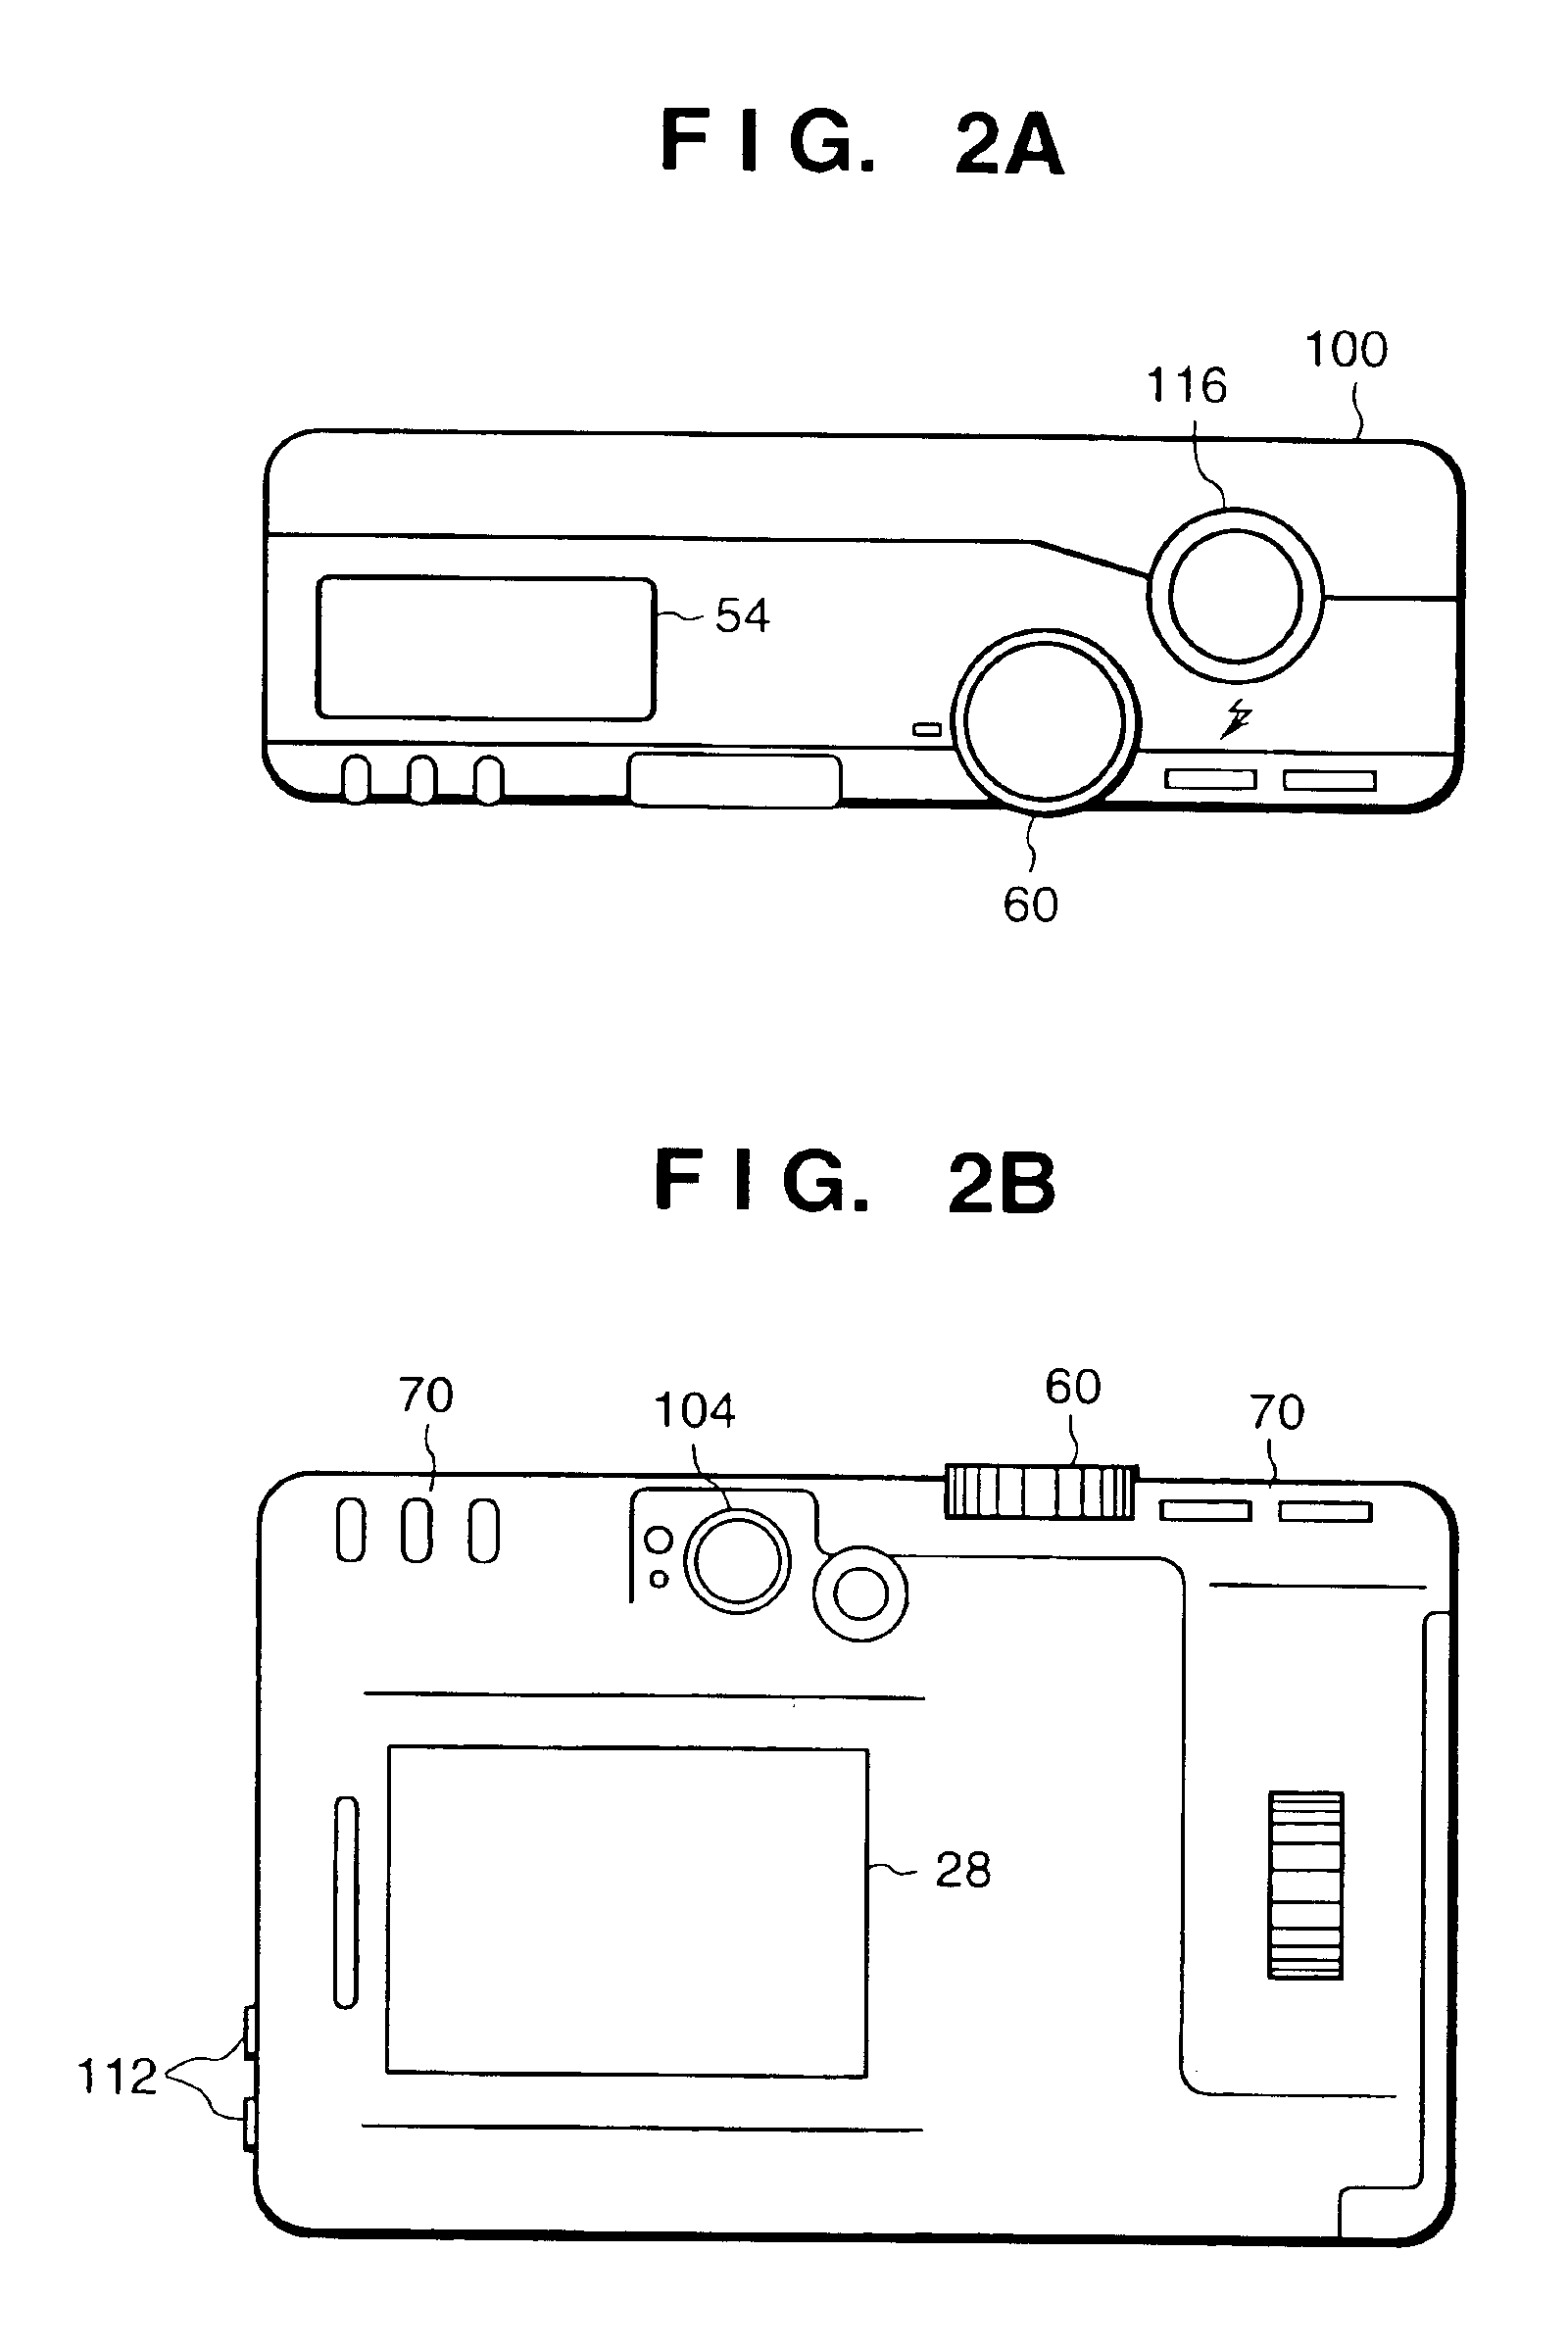 Image communication method, apparatus, and system